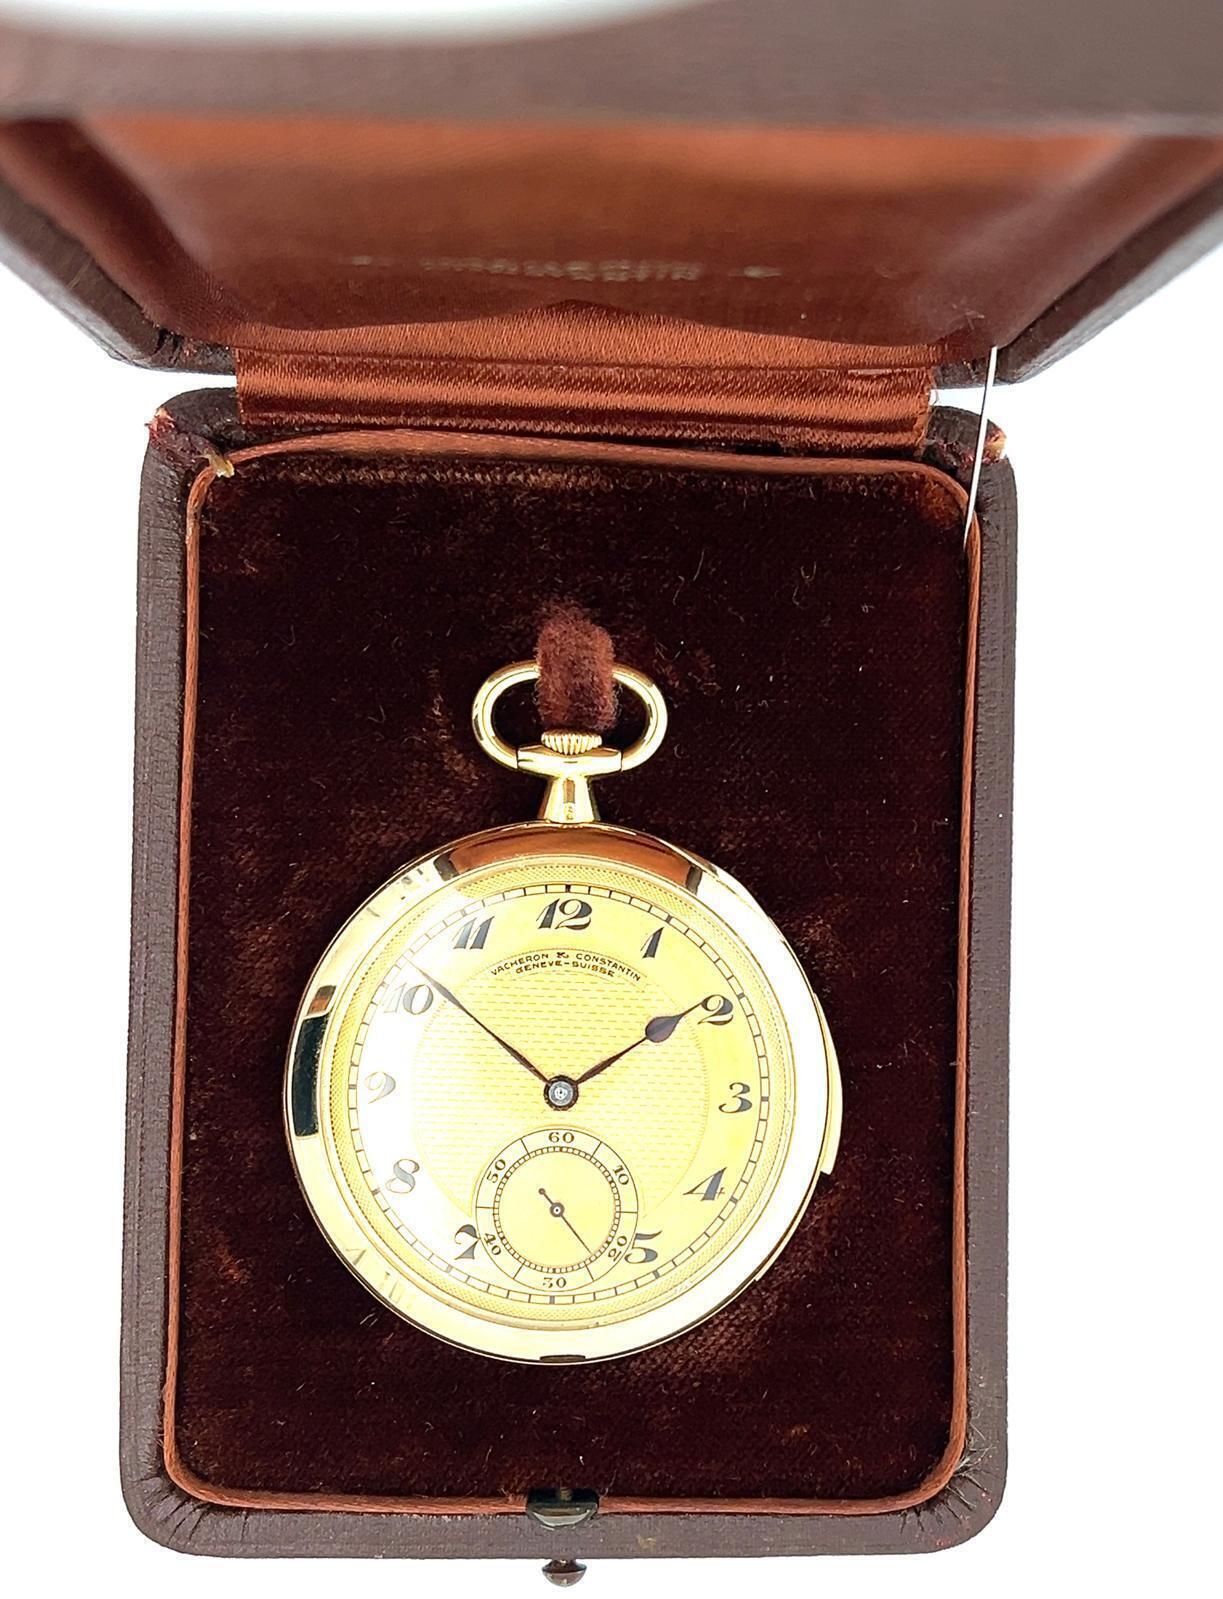 VACHERON AND CONSTANTIN MINUTE REPEATER 18K YELLOW GOLD POCKET WATCH, CIRCA 1918